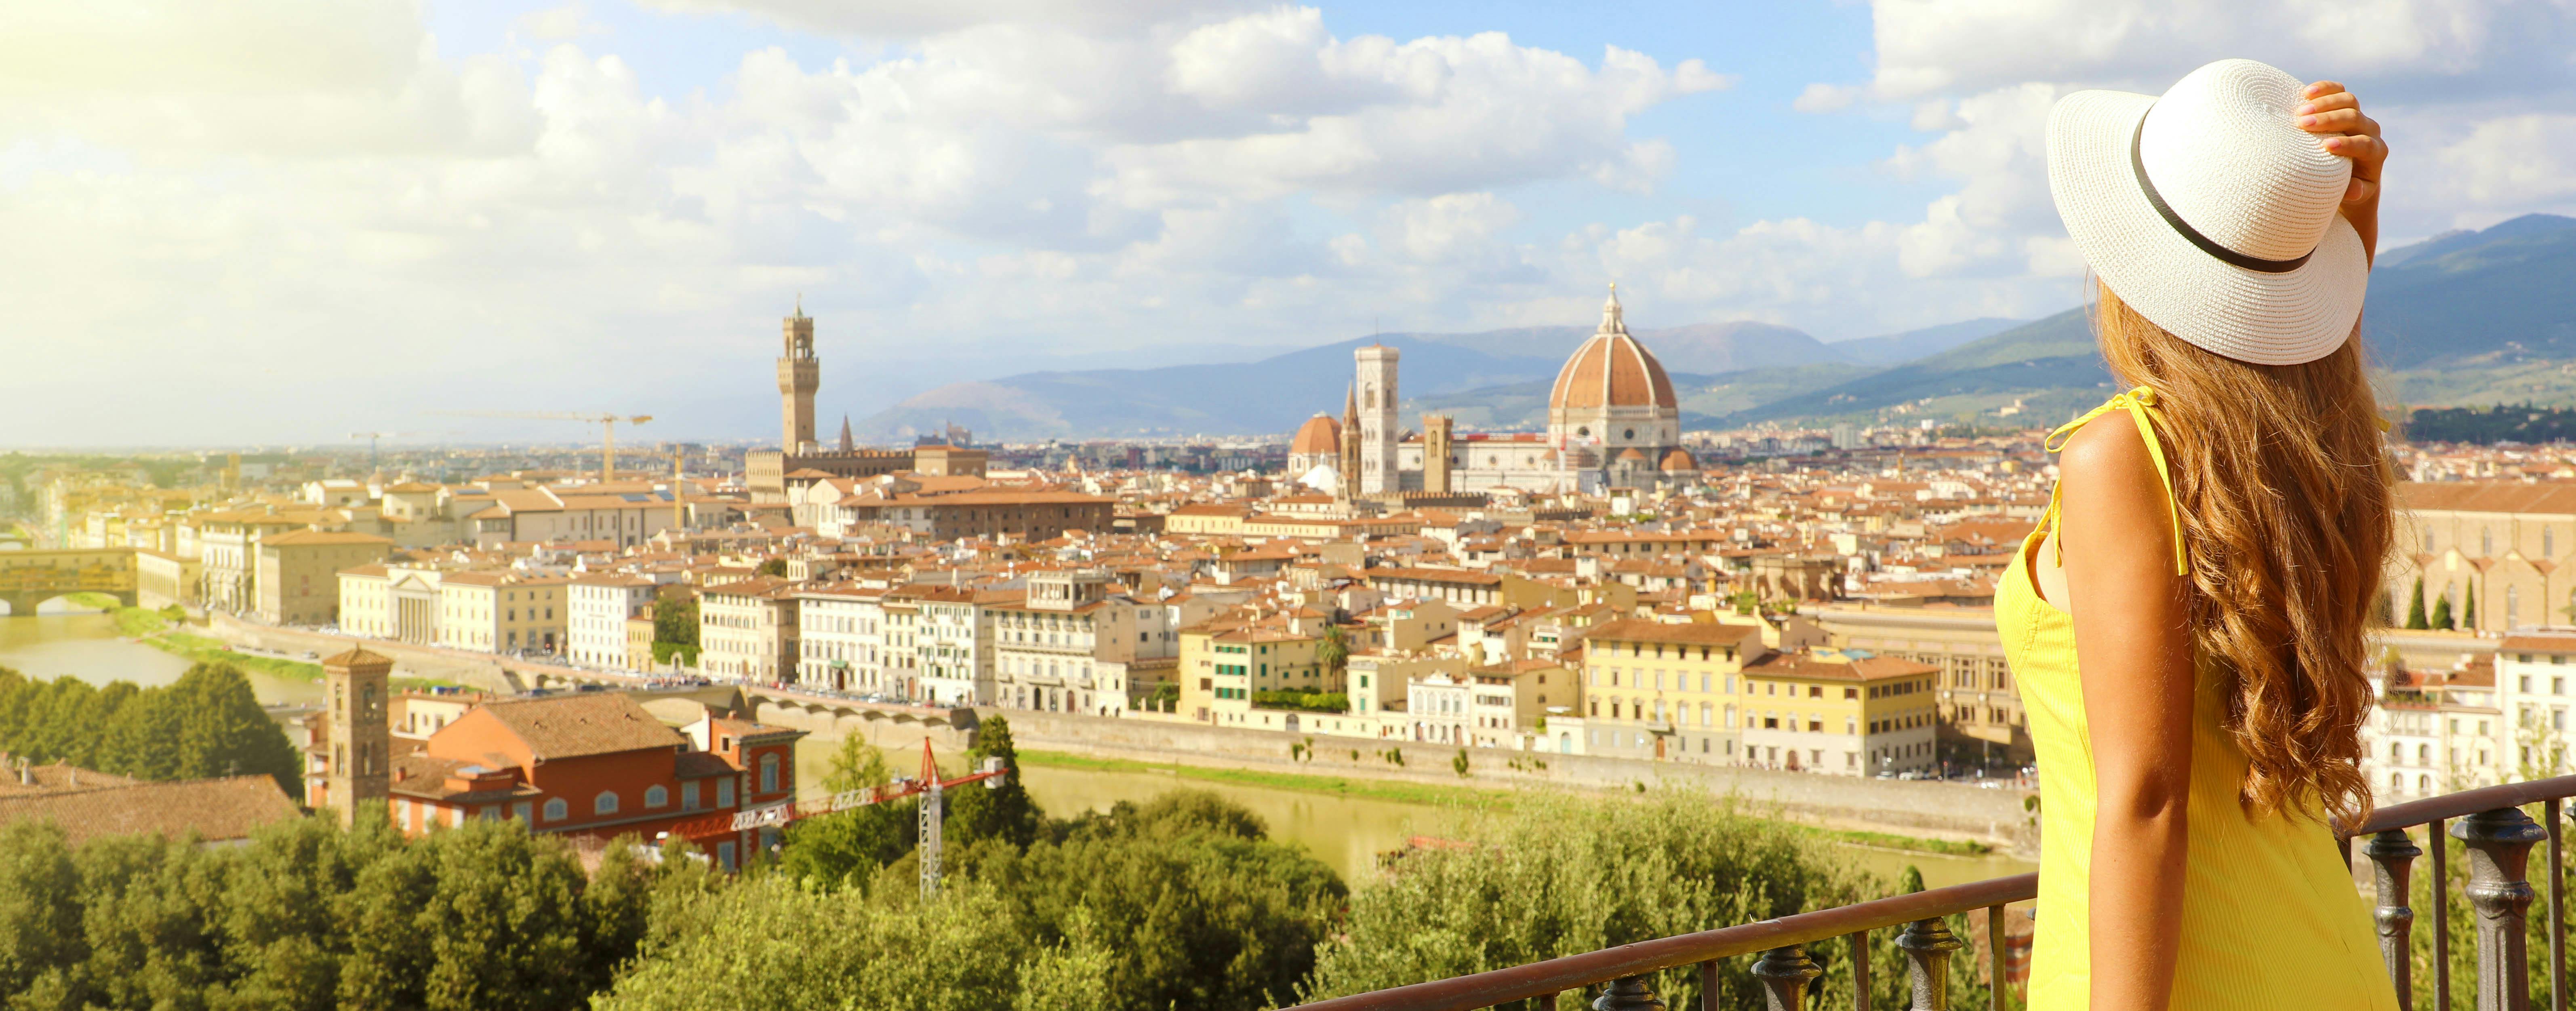 Florence city pass for 5 days with Uffizi, Accademia and Dome